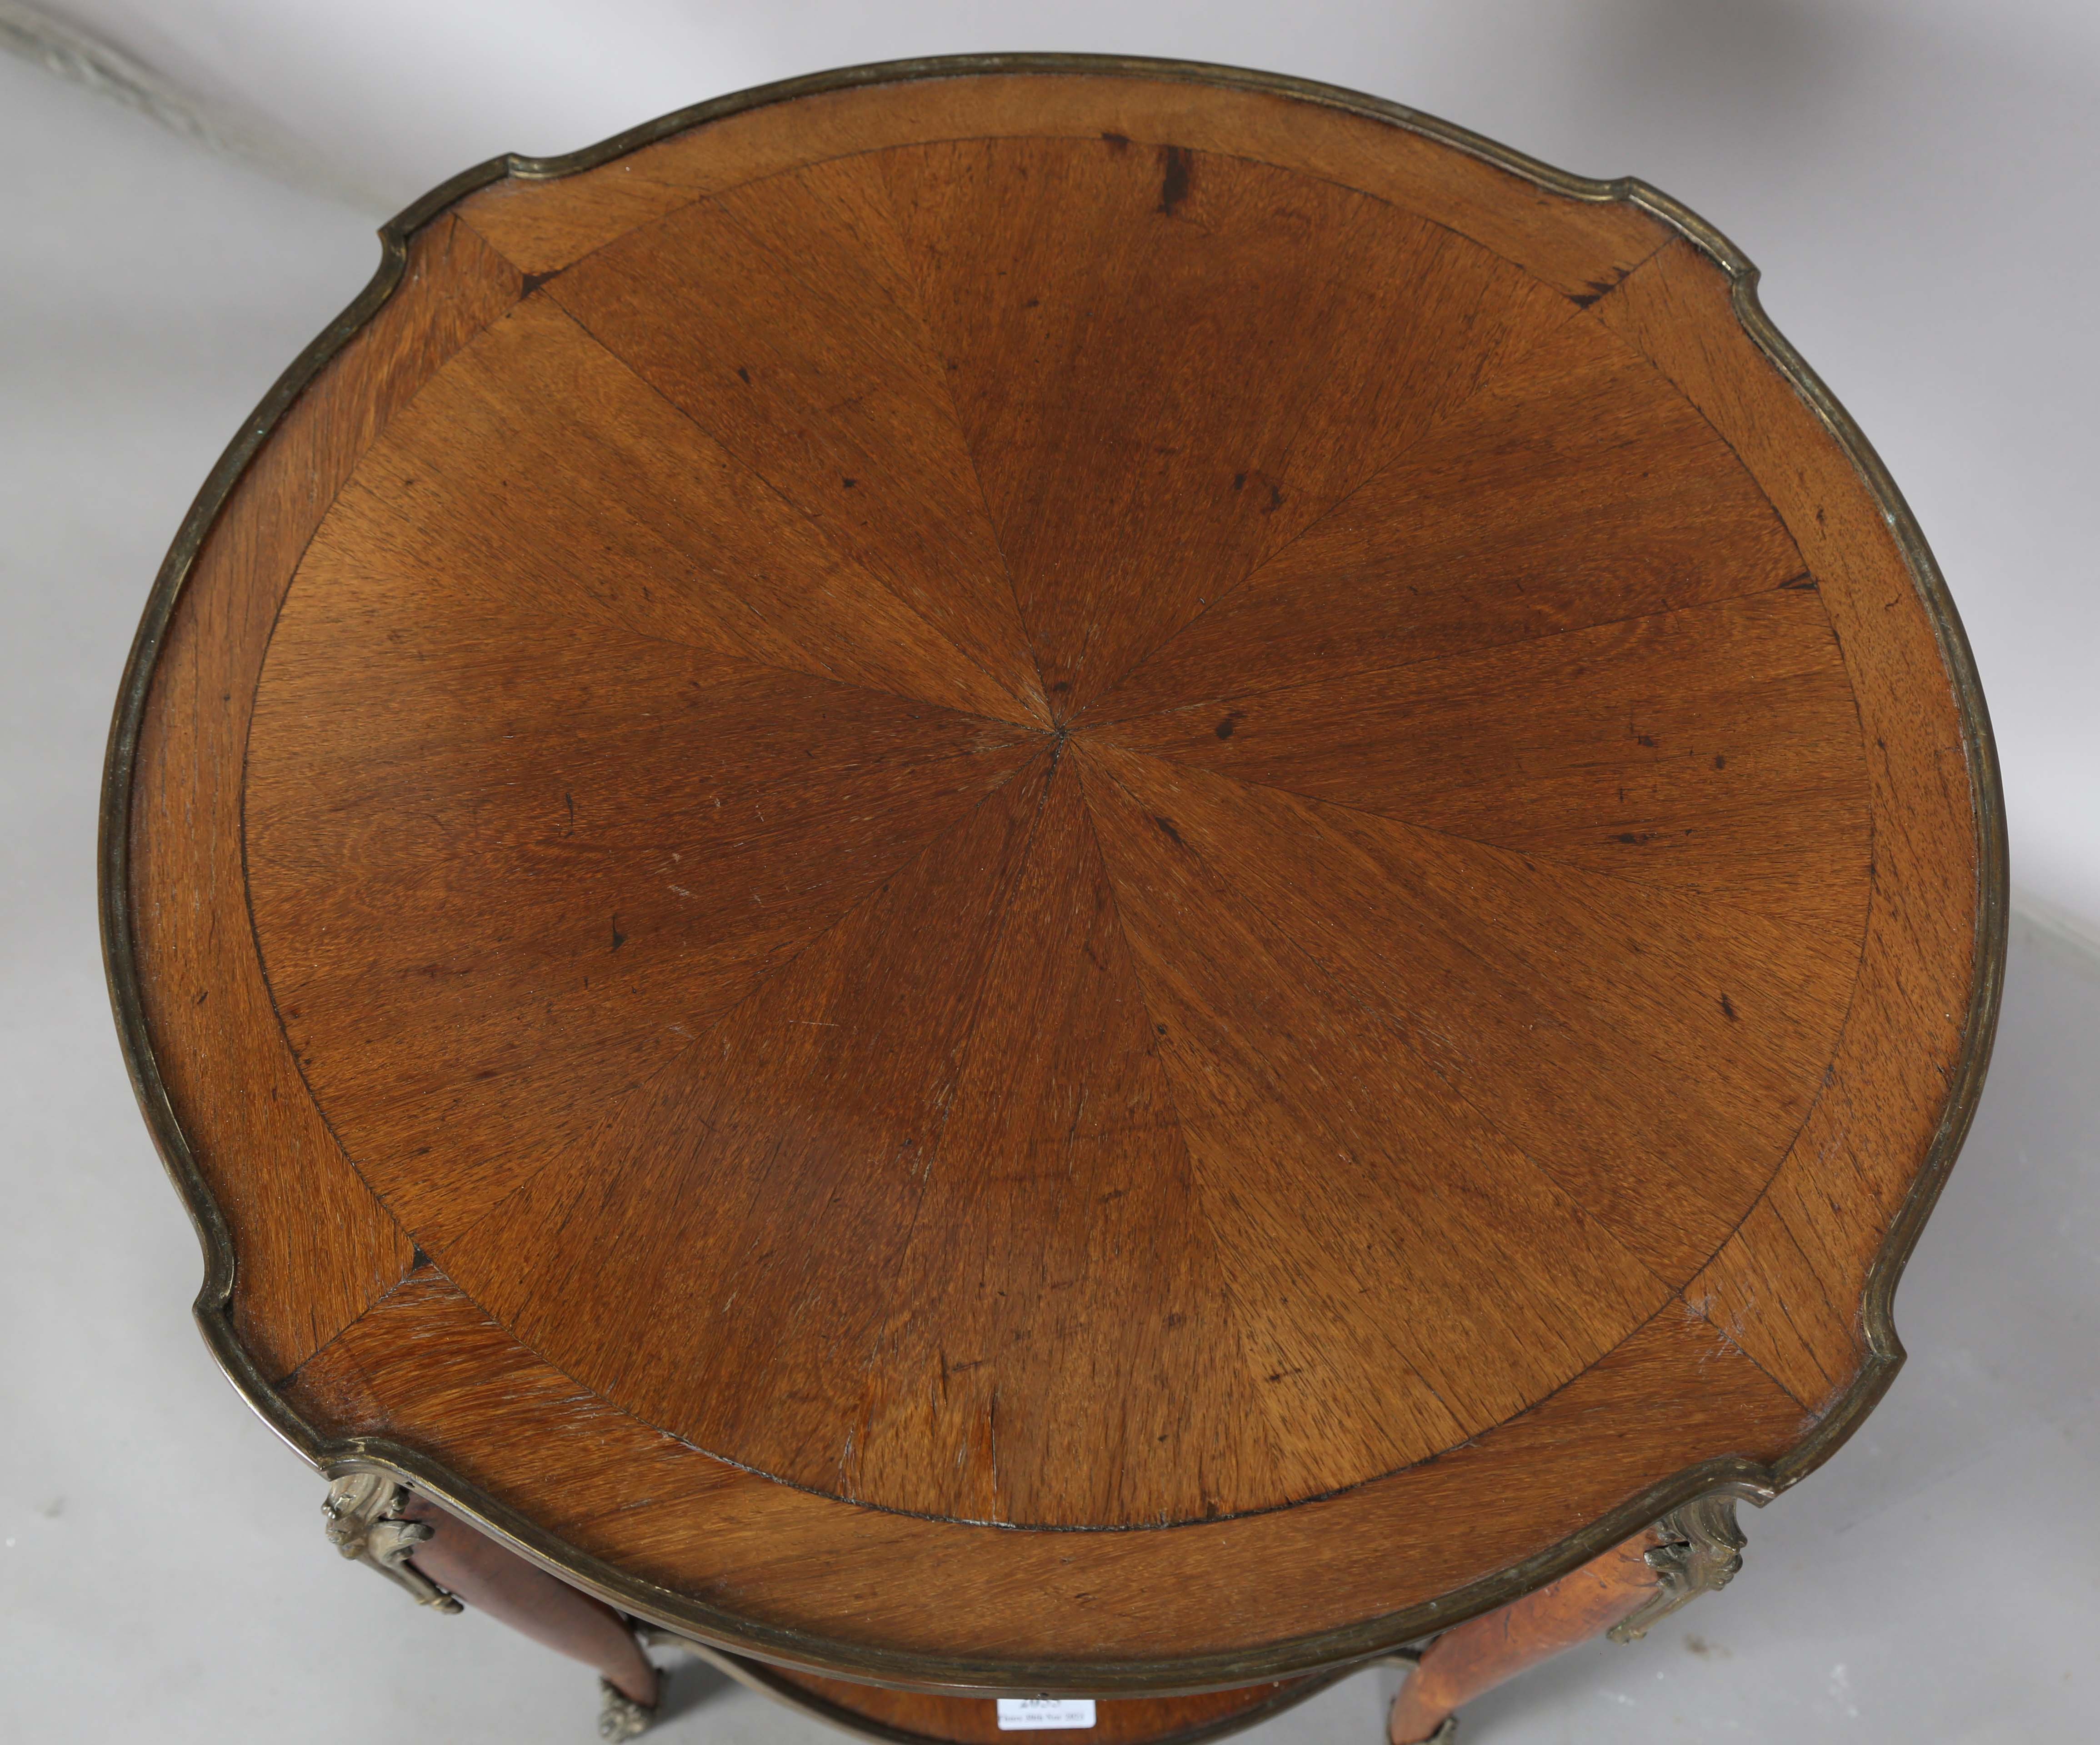 An early 20th century French walnut two-tier occasional table with radial veneers and gilt metal - Image 11 of 11